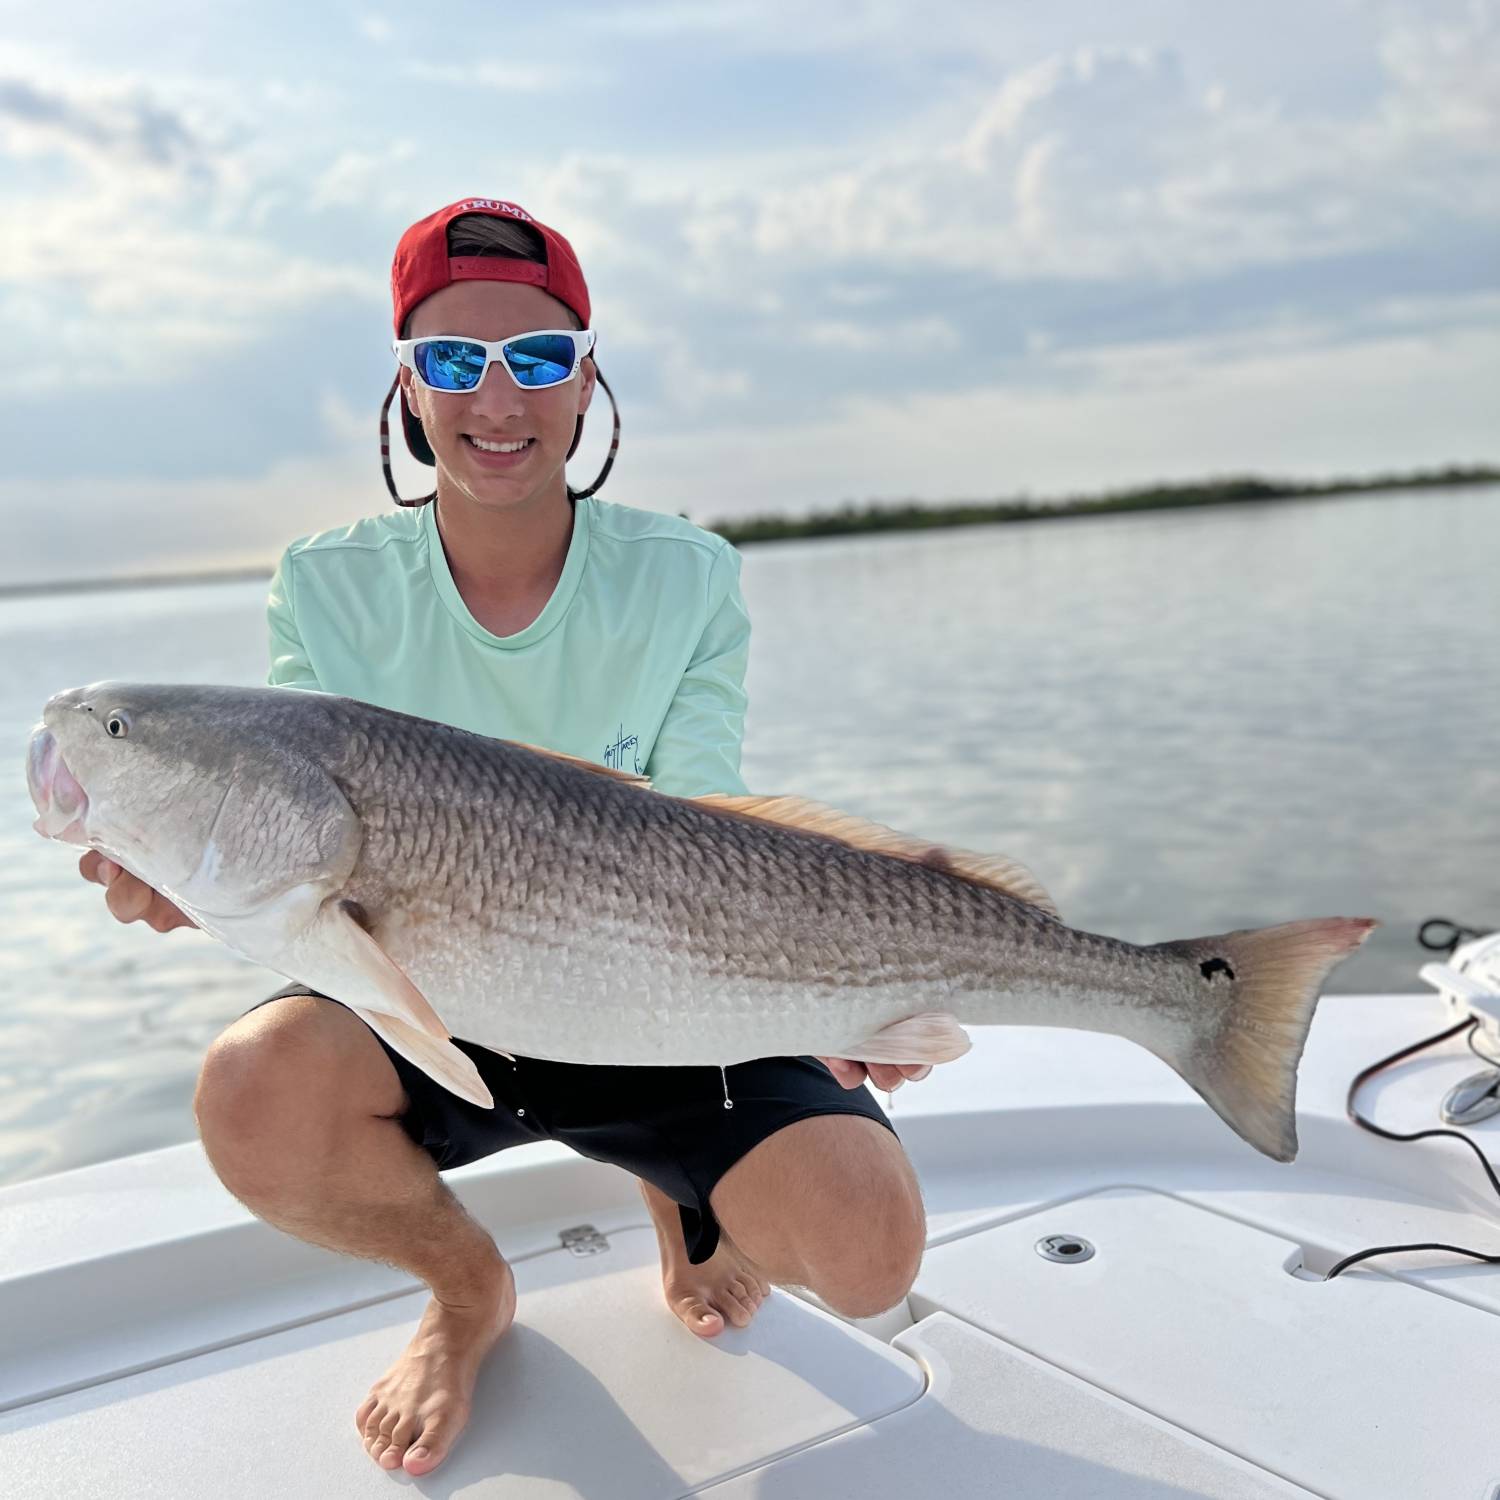 Title: RedFish weekend - On board their Sportsman Masters 247 Bay Boat - Location: Mosquito Lagoon. Participating in the Photo Contest #SportsmanJuly